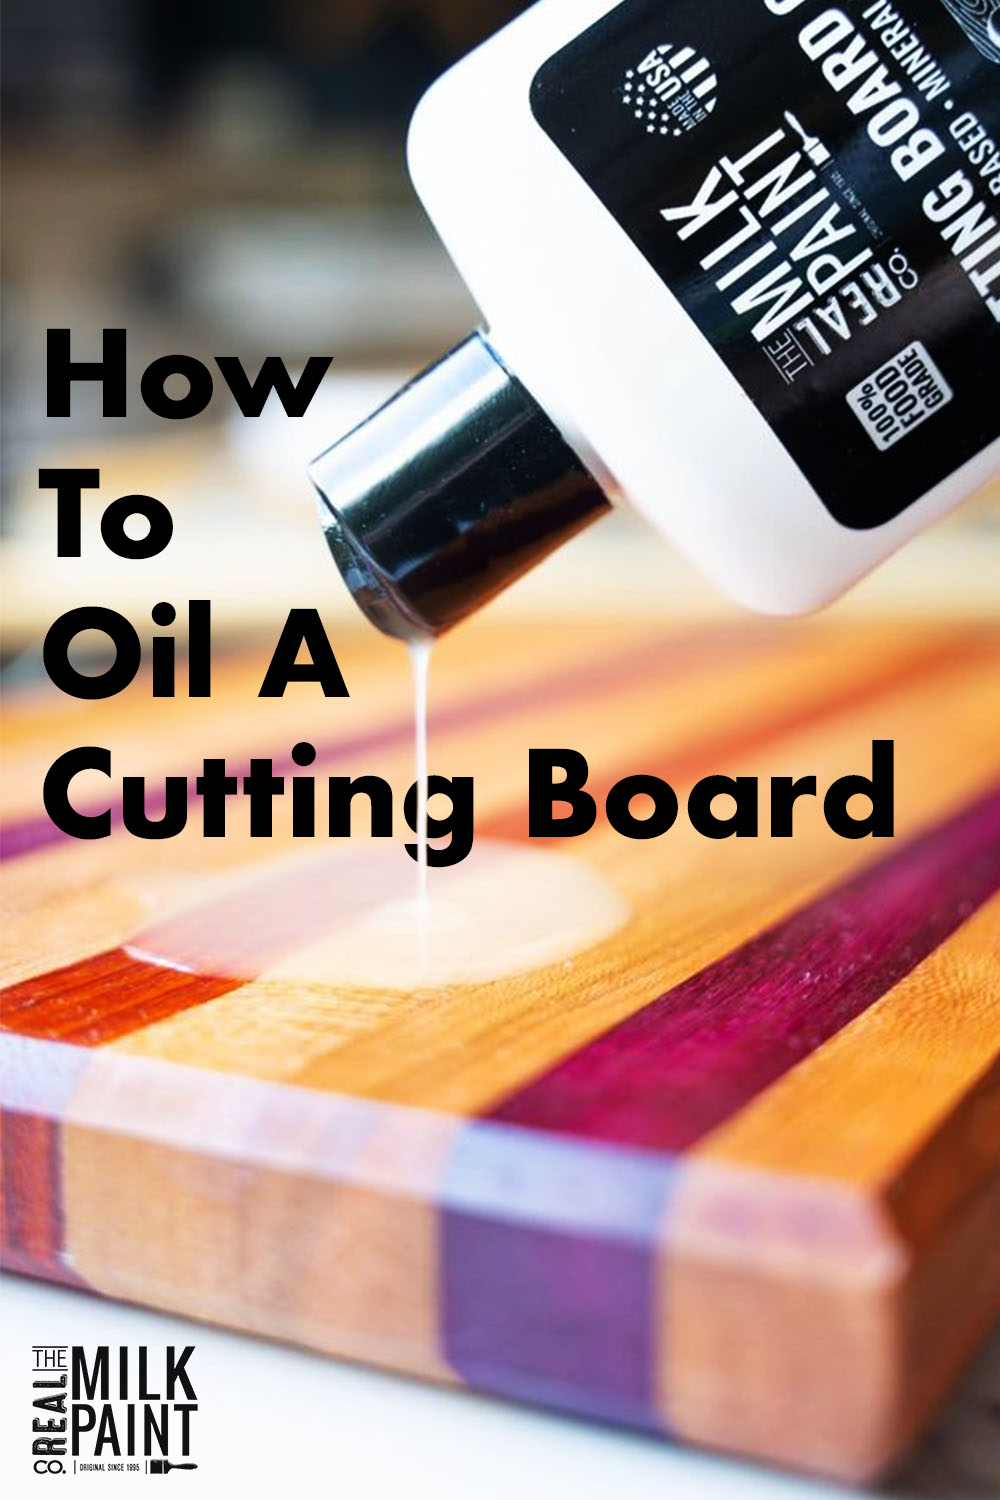 How To Oil A Cutting Board